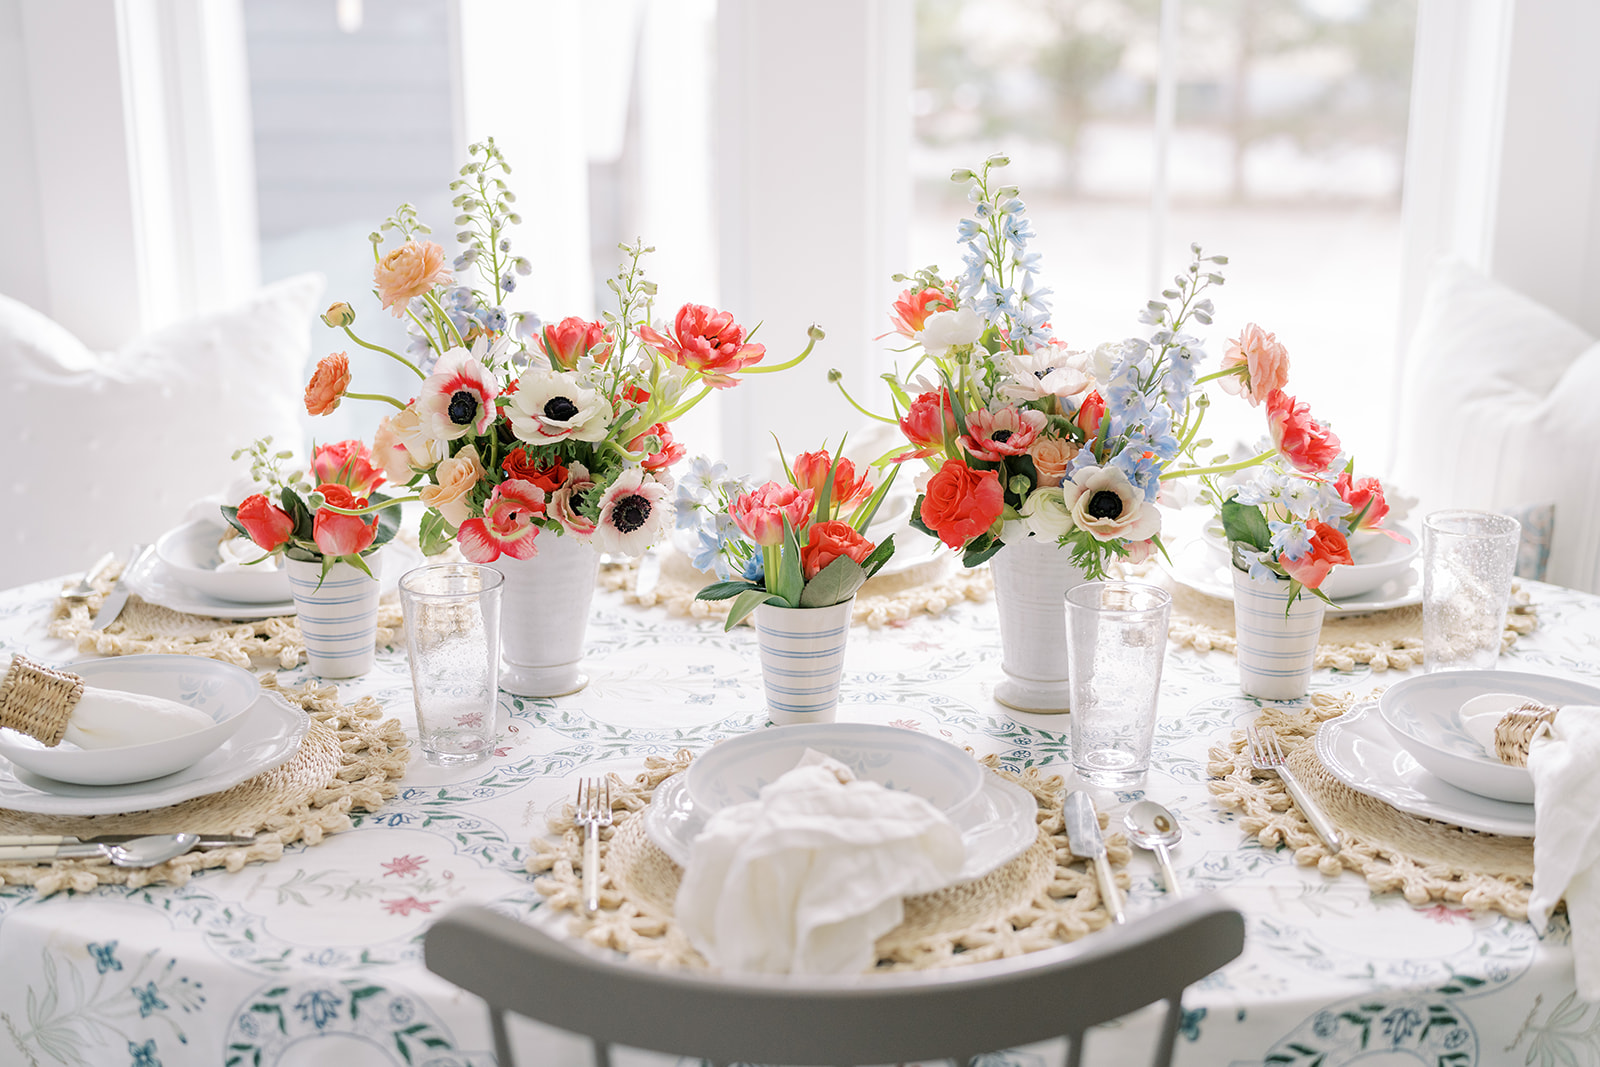 Create a Sweet Valentine's Day Table Setting with a Charming Centerpiece